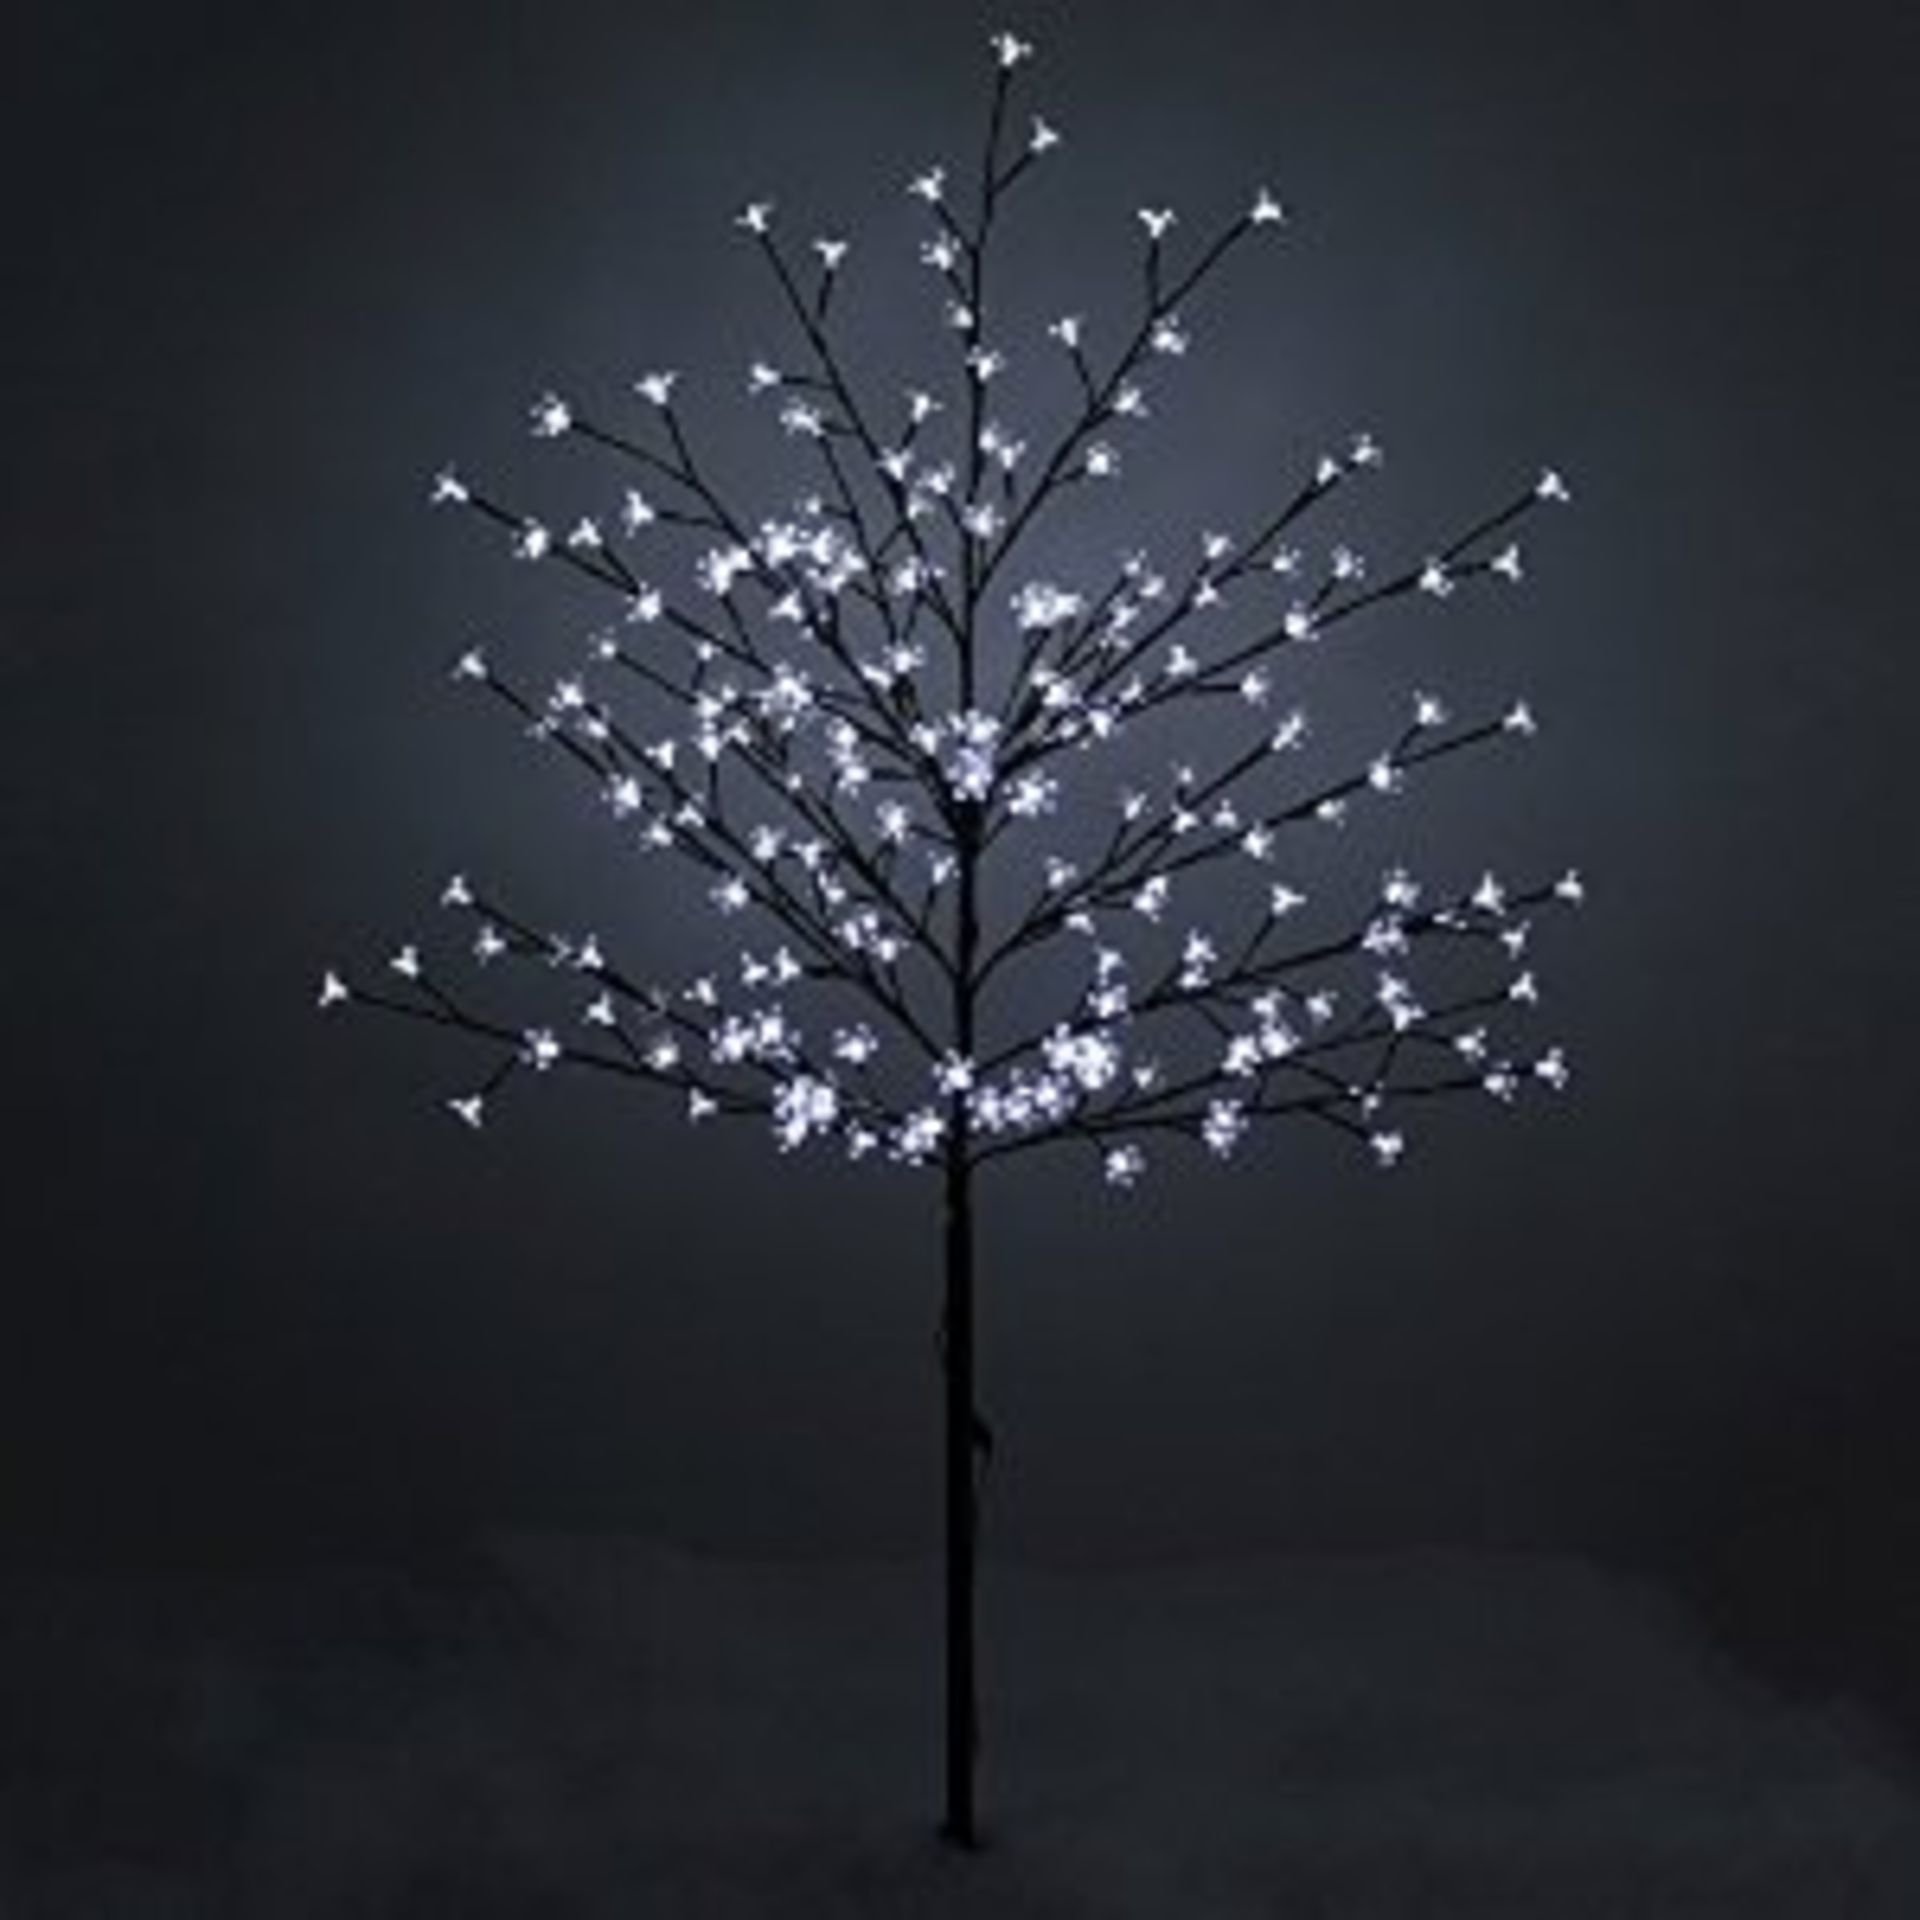 V Brand New 150cm Snow White LED Blossom Tree For Indoor And Outdoor Use RRP £54.99